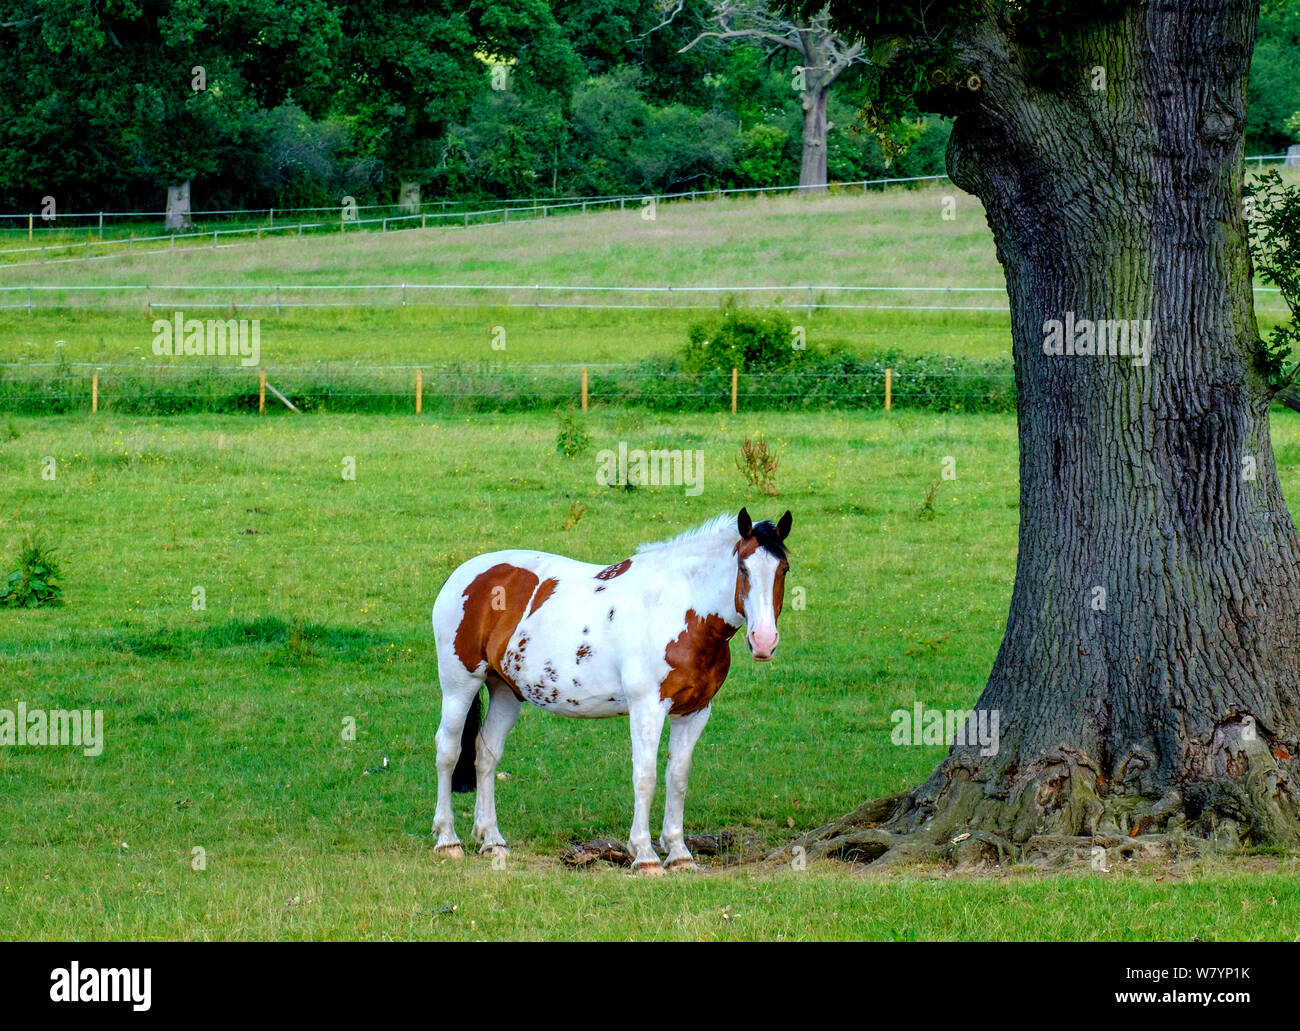 White and chestnut Pinto Horse with bald face, standing in a field next to a tree at Bury Farm, Edgware Greater London, UK. Stock Photo